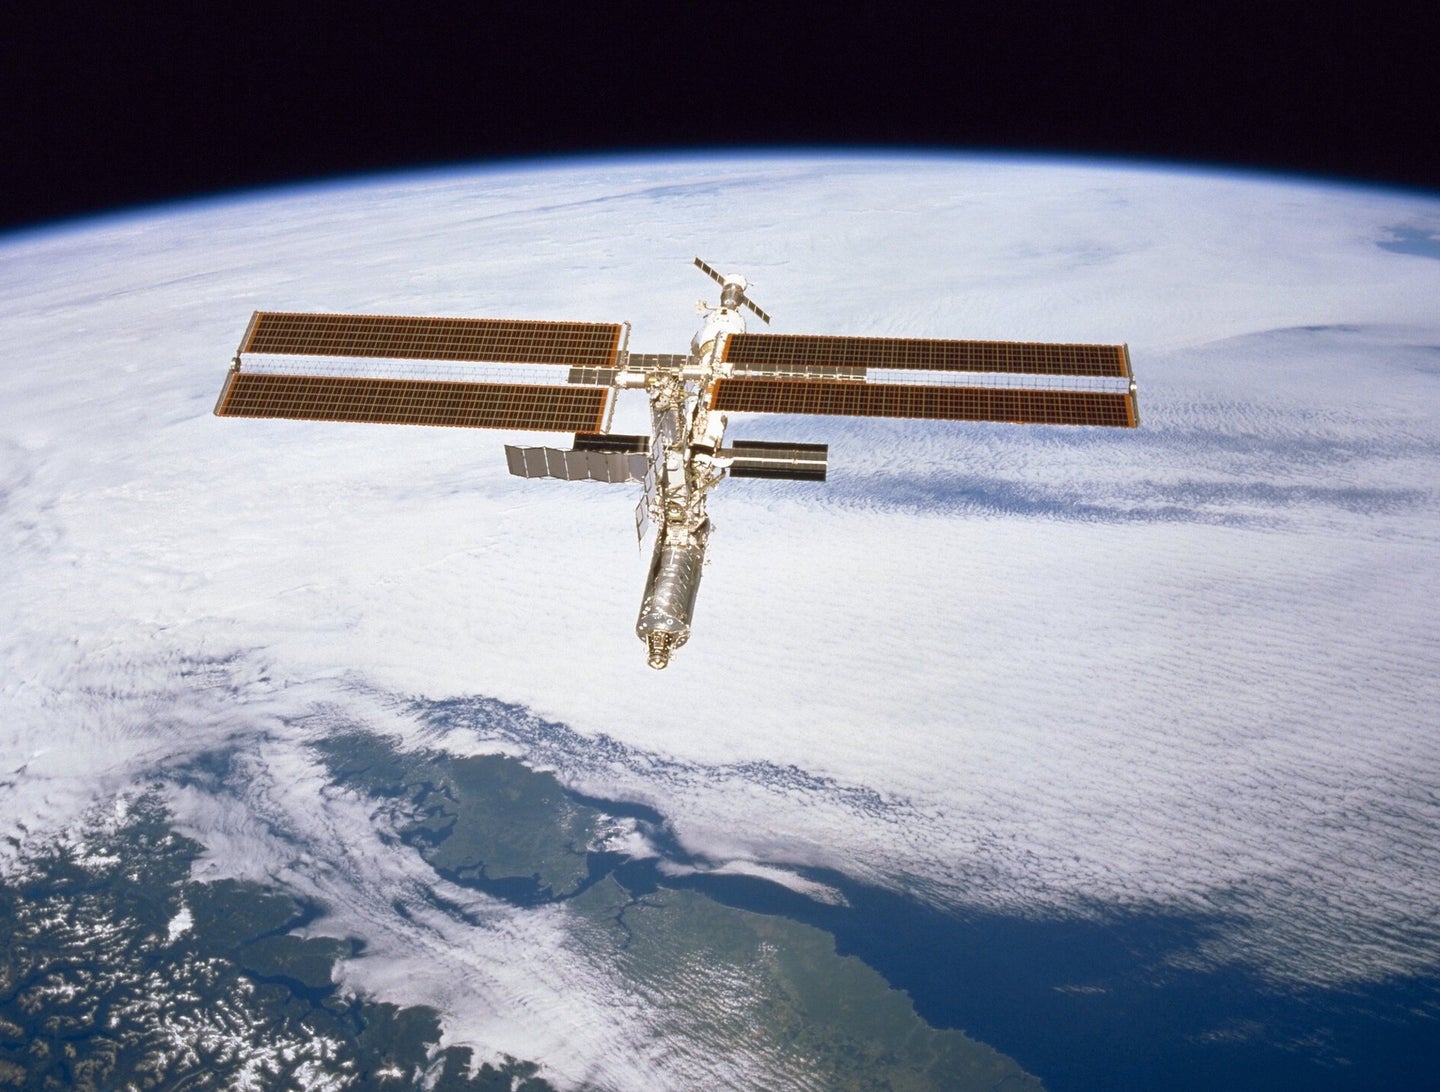 International Space Station now extended to 2030 in the Earth's lower orbit over clouds and South America